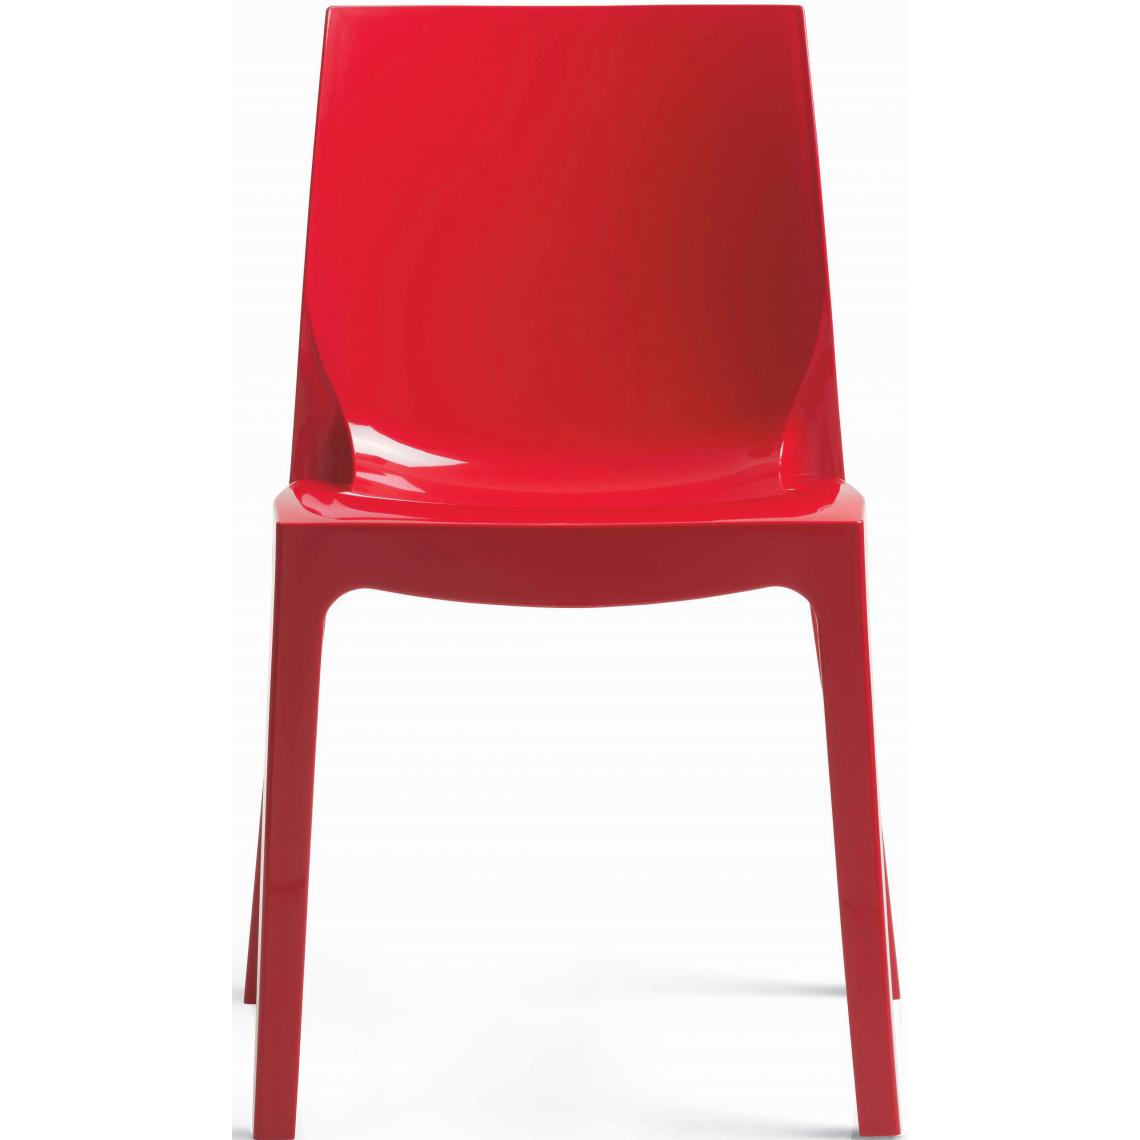 3S. x Home - Chaise Design Rouge Laquée LADY - Chaises